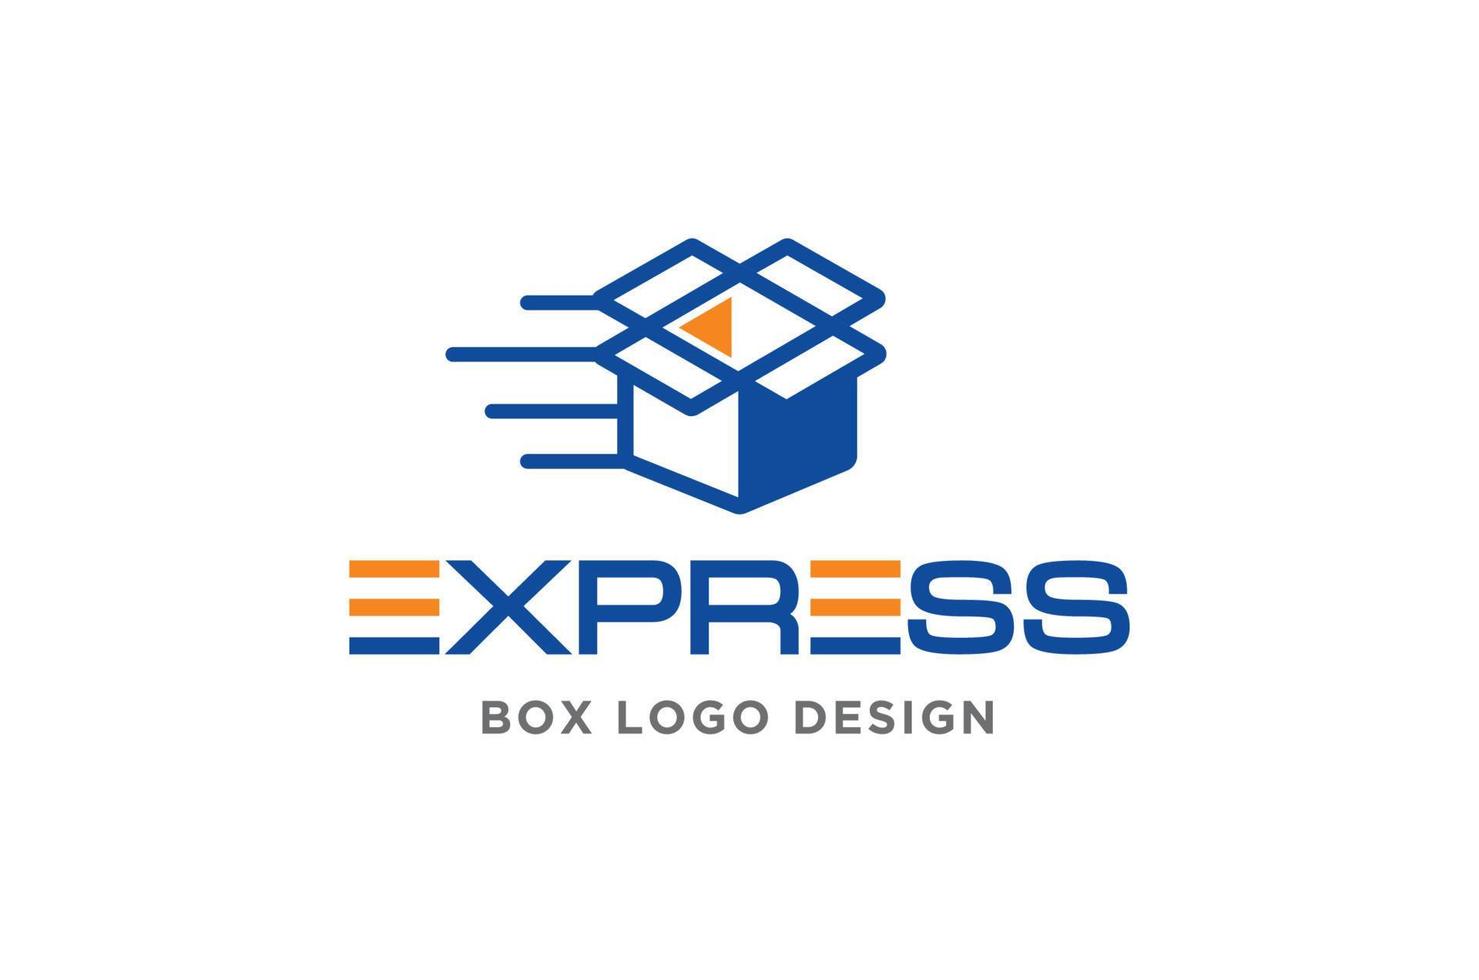 An Express Box Logo Design Concepts For Delivery, Drop Shipping Or Arbitrage Business vector